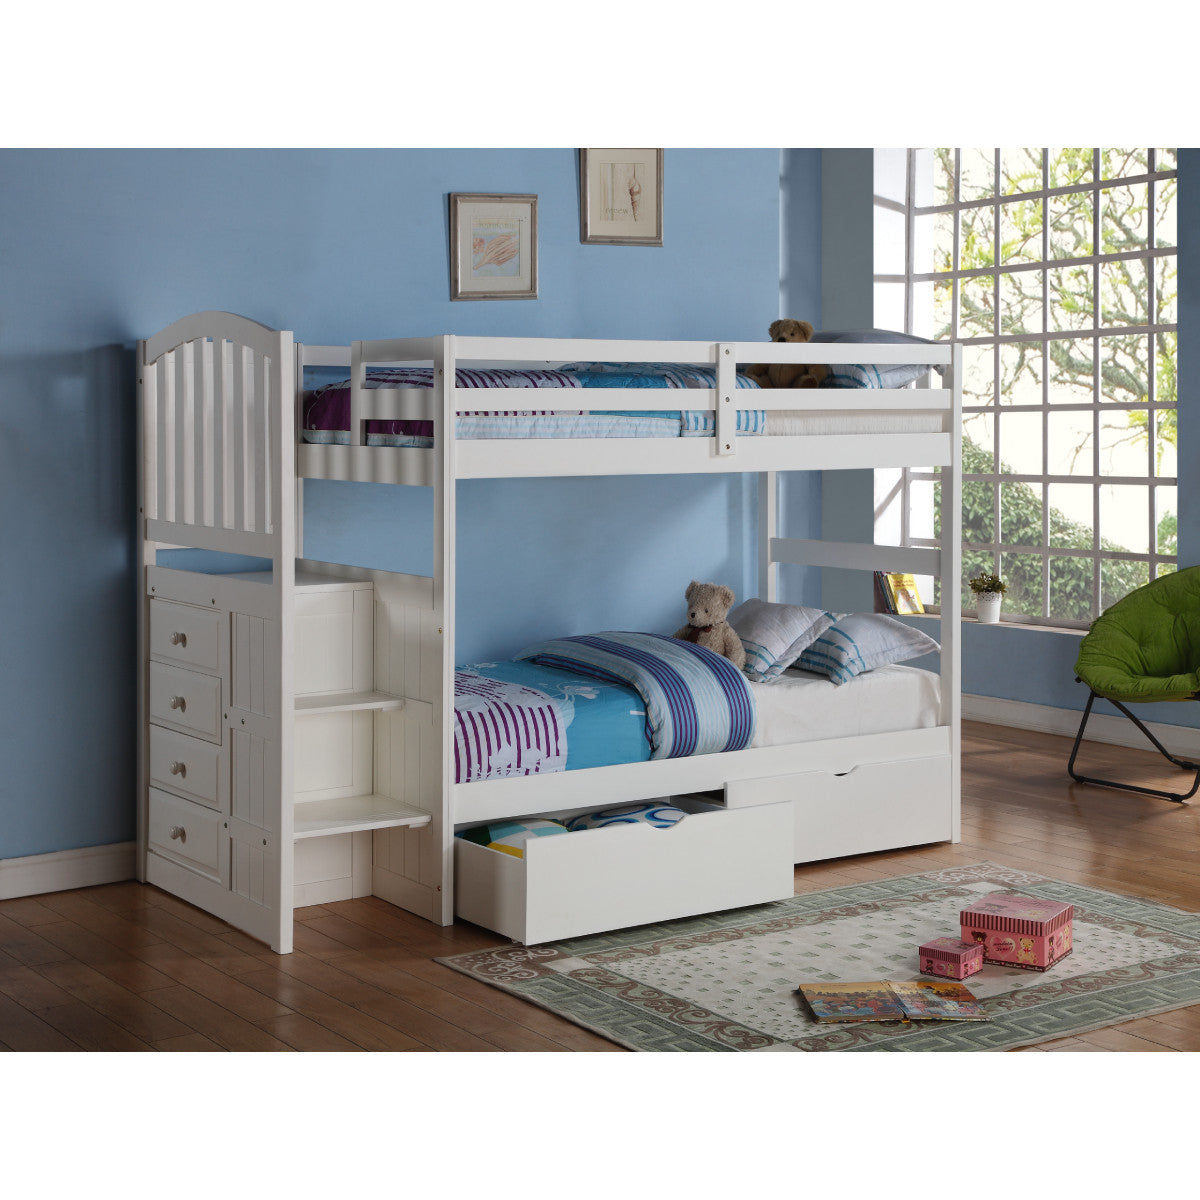 ARCH MISSION STAIRWAY BUNKBED WITH DUAL UNDER BED DRAWERS WHITE FINISH